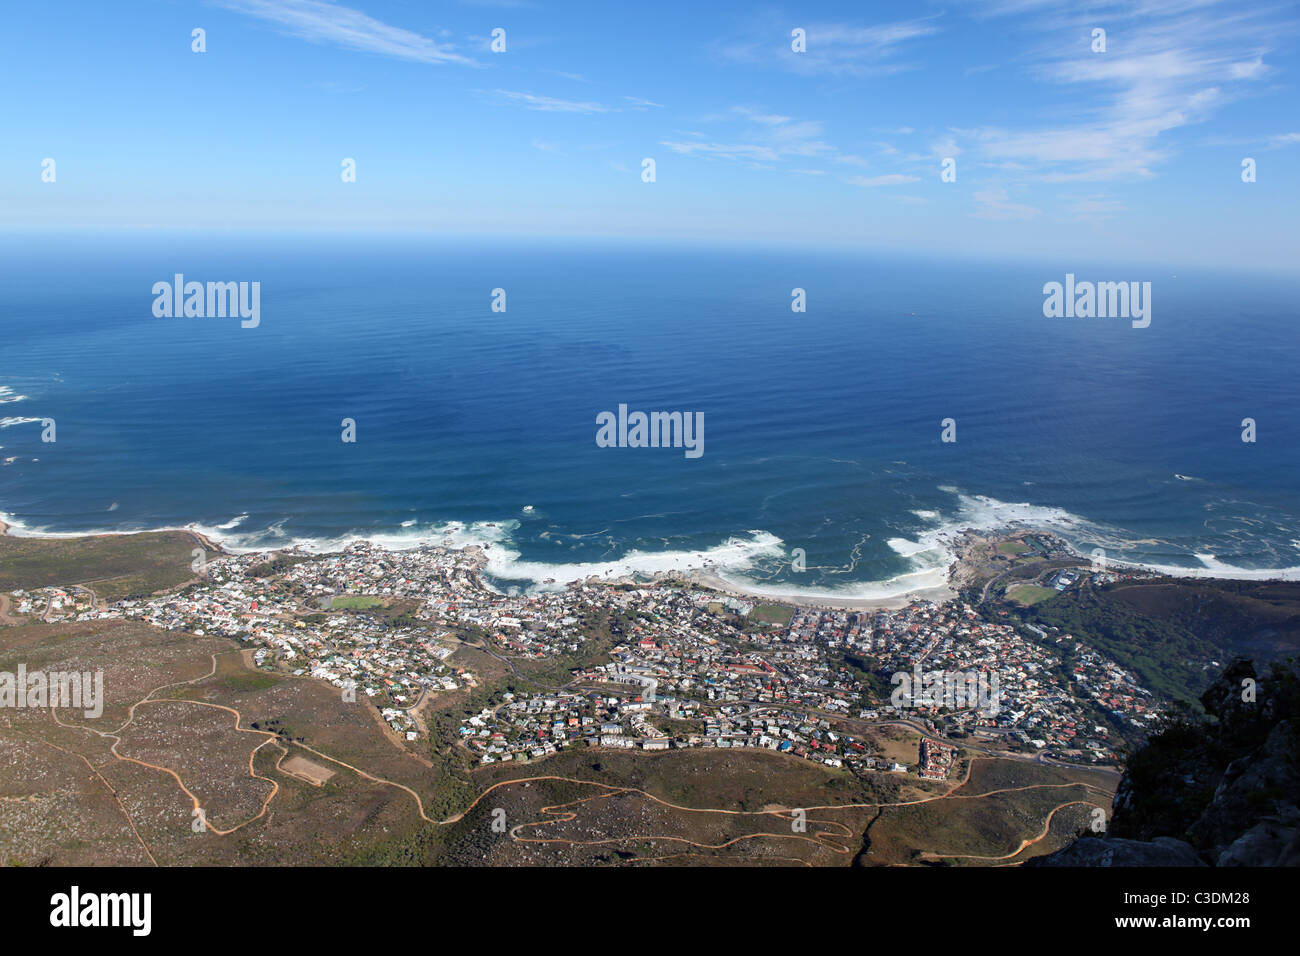 The view of Camps bay from Table Mountain, Cape Town, South Africa. Stock Photo